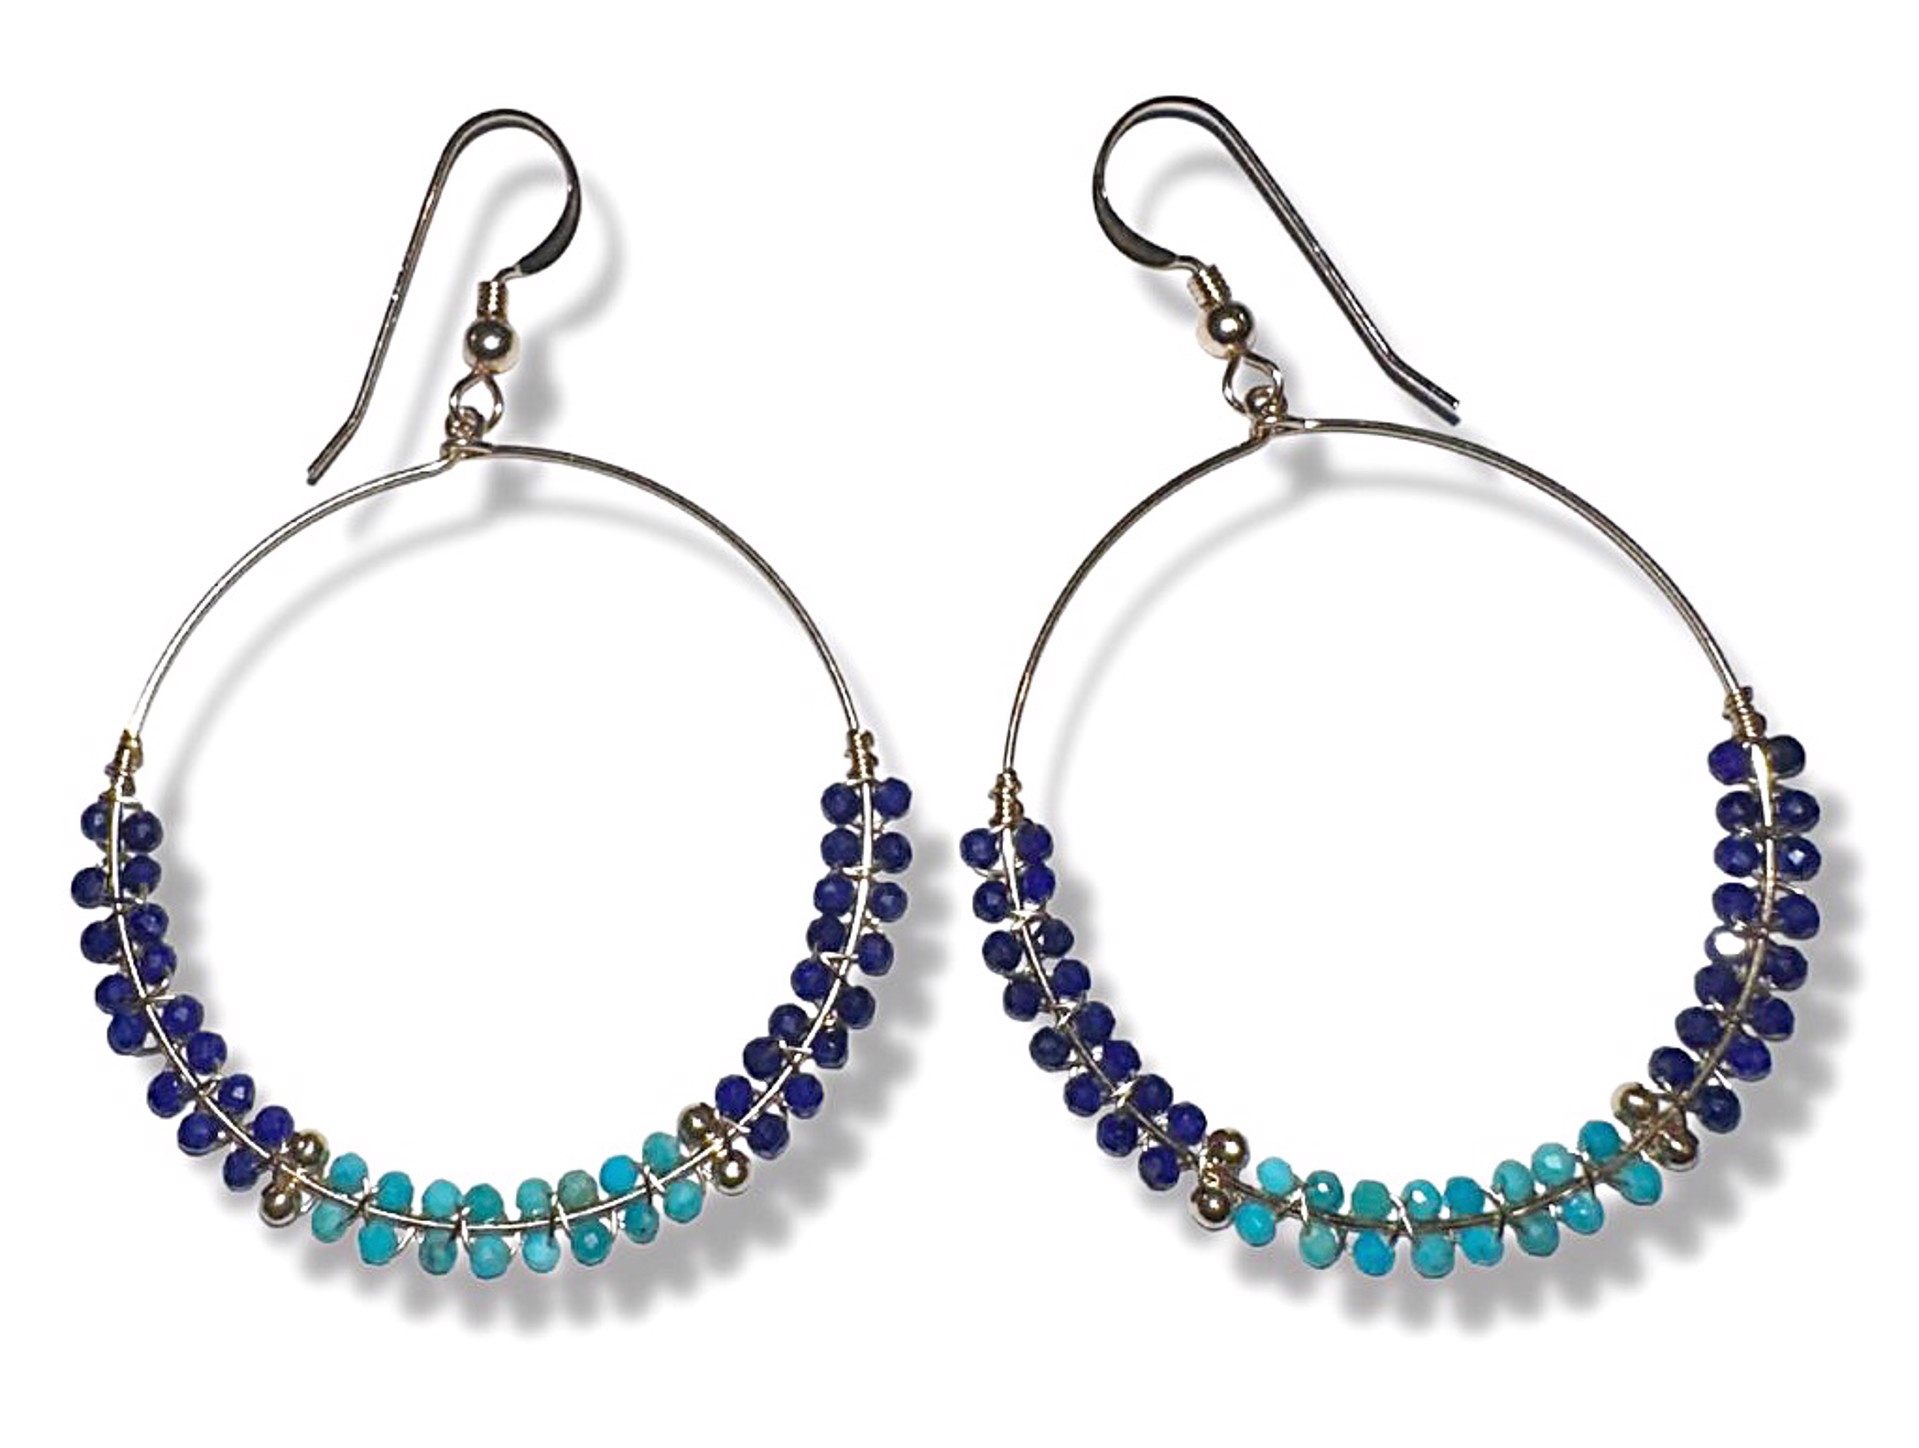 Earrings - Lapis and Sleeping Beauty Turquoise Gold Filled Hoops by Julia Balestracci